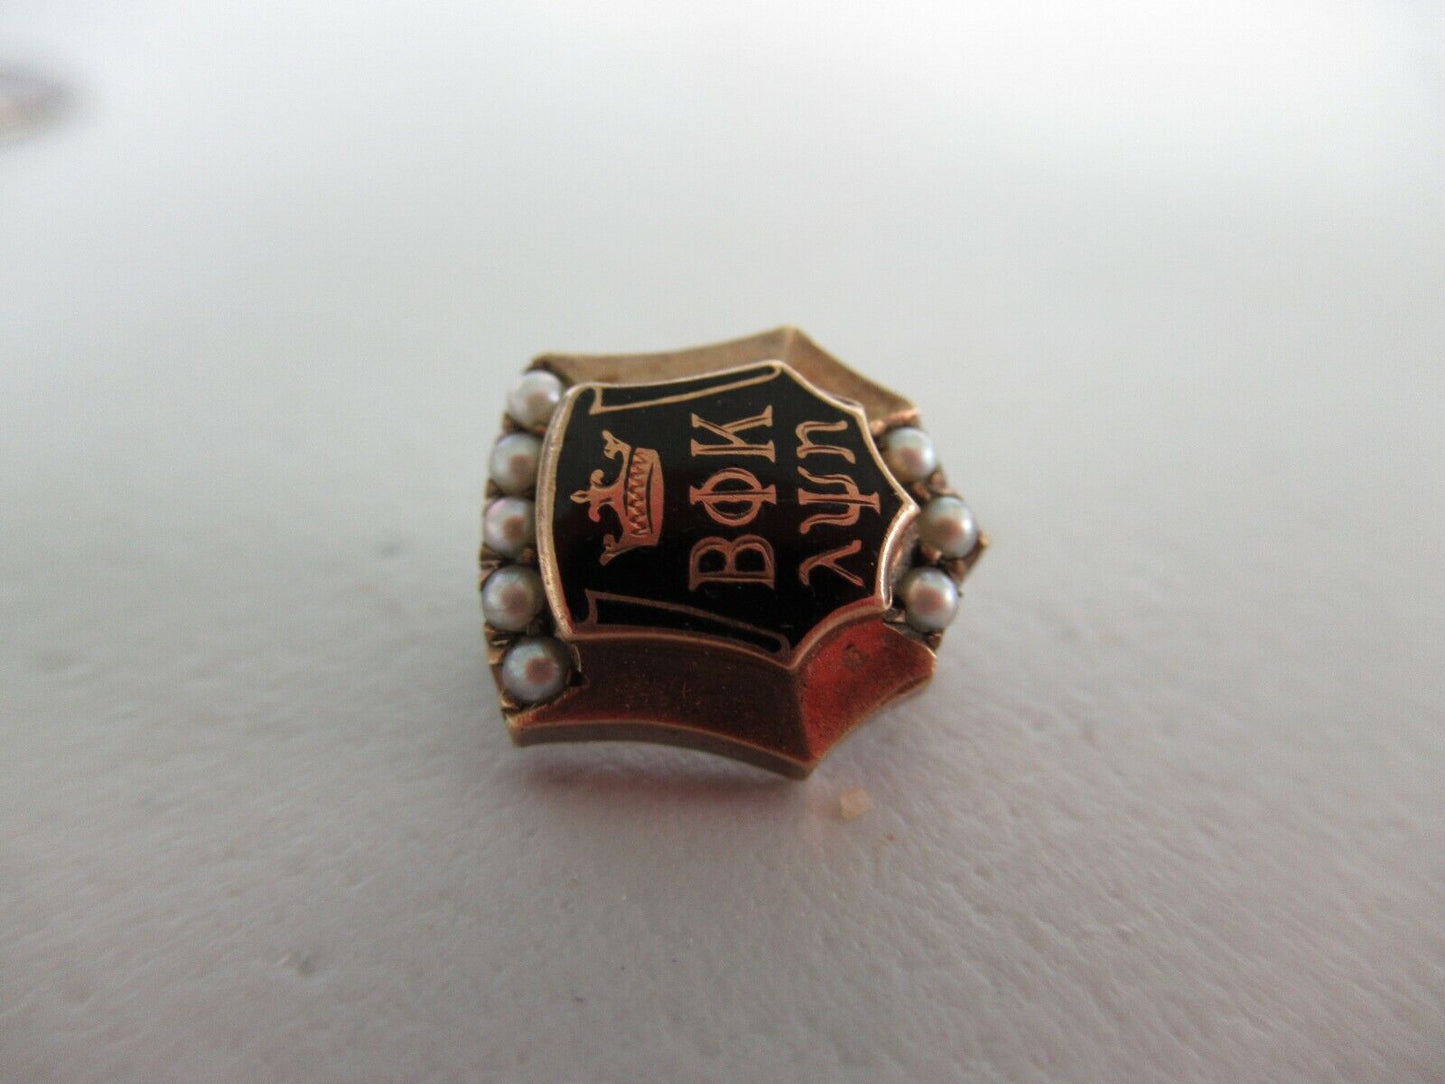 USA FRATERNITY PIN BETA PHI KAPPA. MADE IN GOLD 10K. NAMED. marked. 10